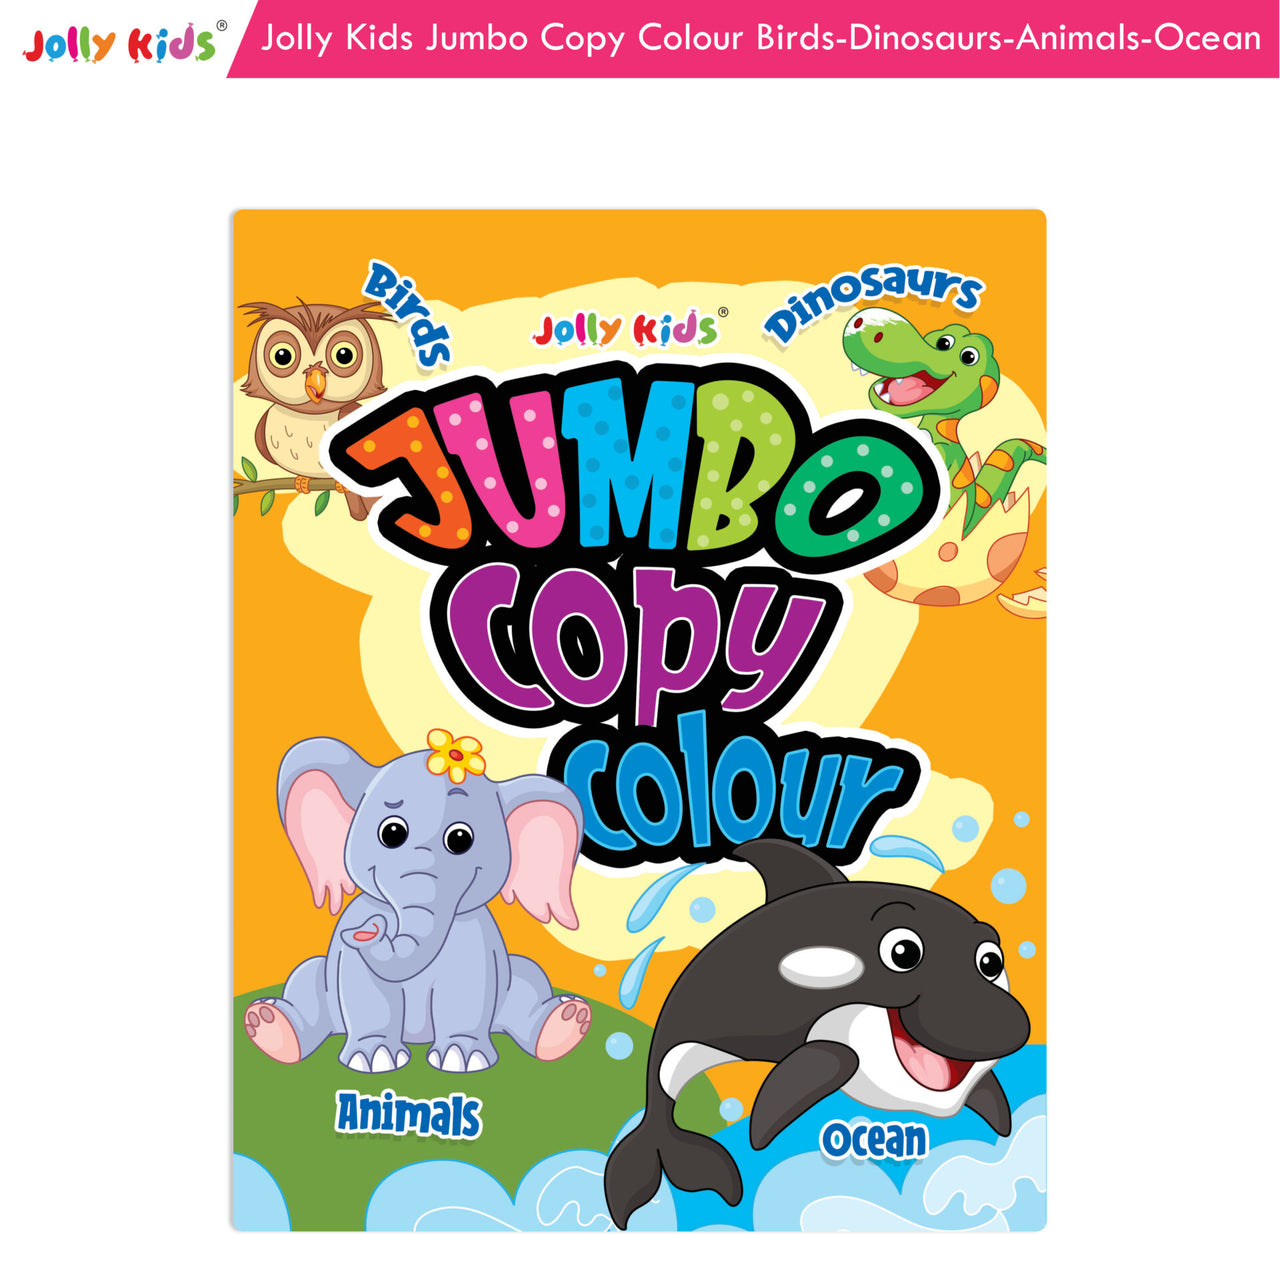 Jolly Kids Jumbo Copy Colouring Books for Kids| Fun Colouring Activity Books: Birds, Dinosaurs, Animals & Ocean| Ages 3-10 Years - Distacart